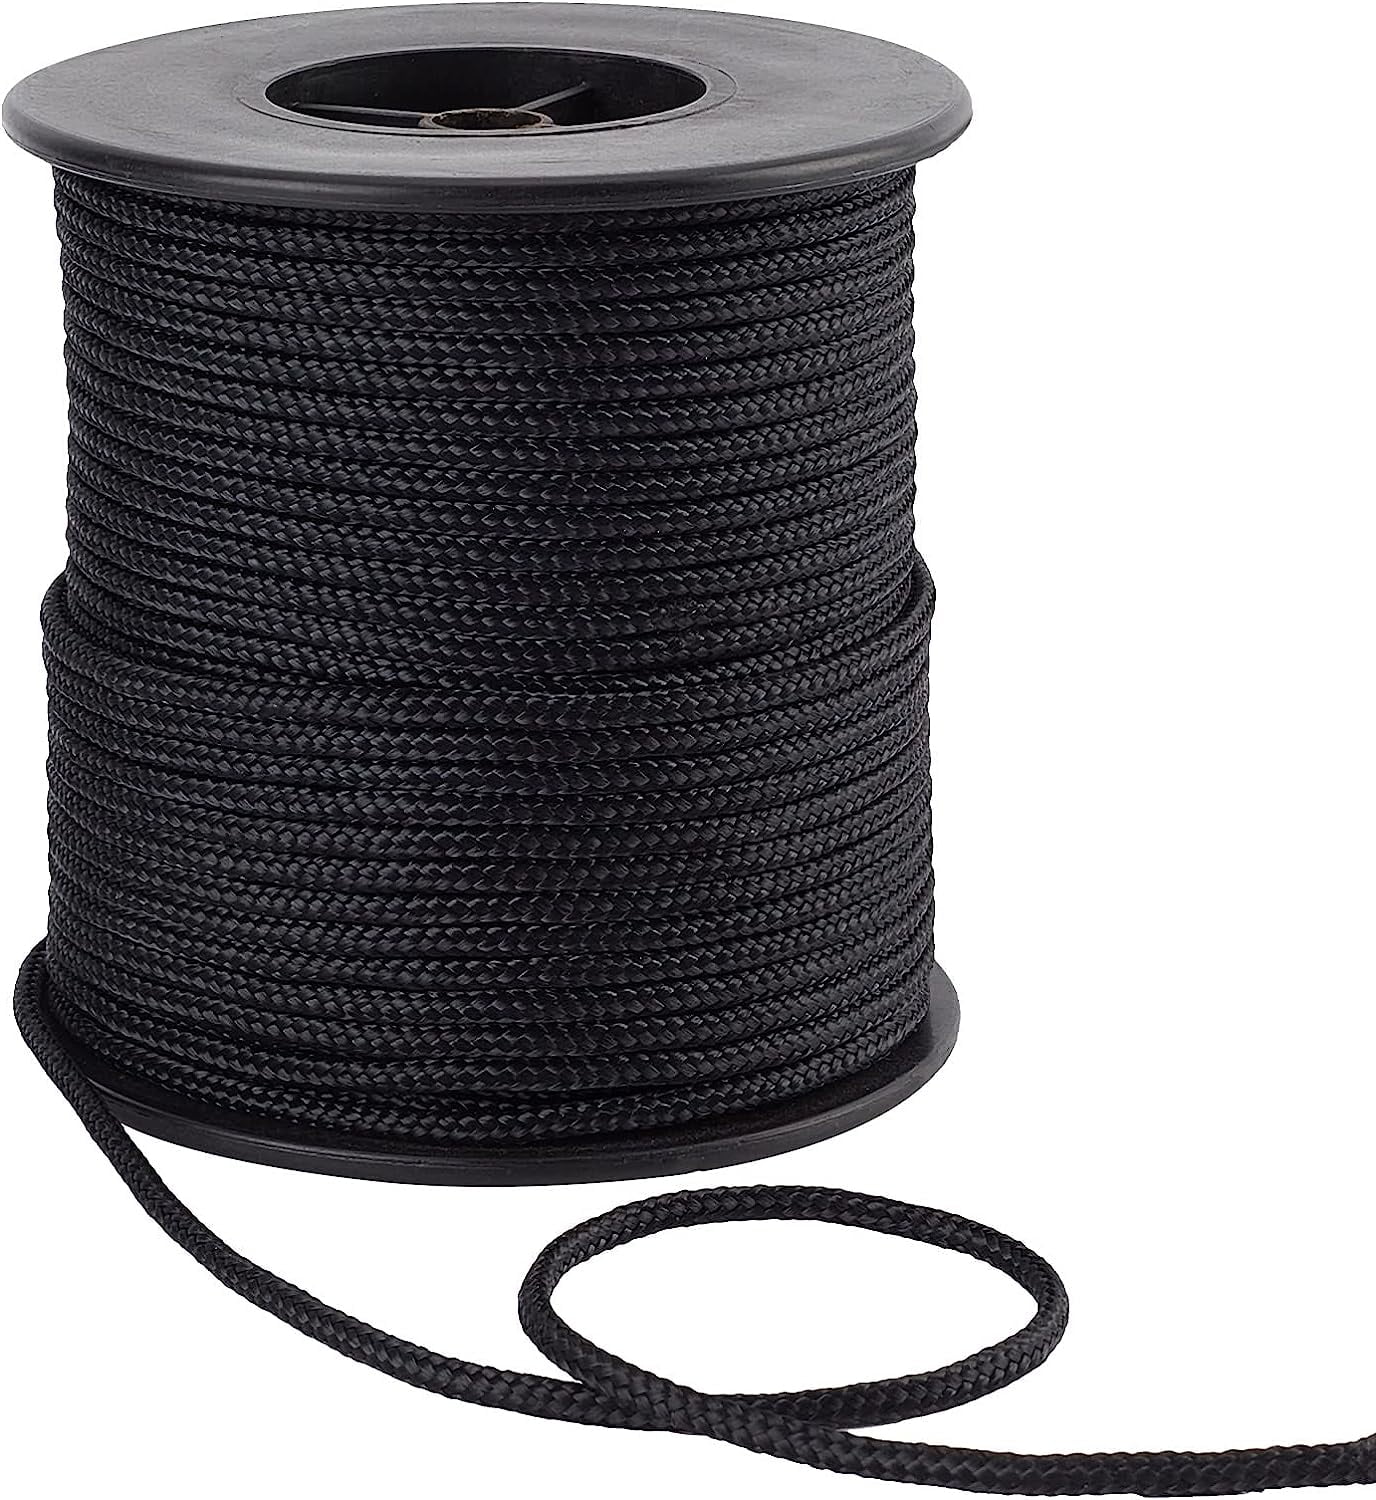 3mm 54yard Black Nylon Rope Parachute Cord Braided Lift Shade Blind String  Shade Cord Wind Chime Cord Replacement 